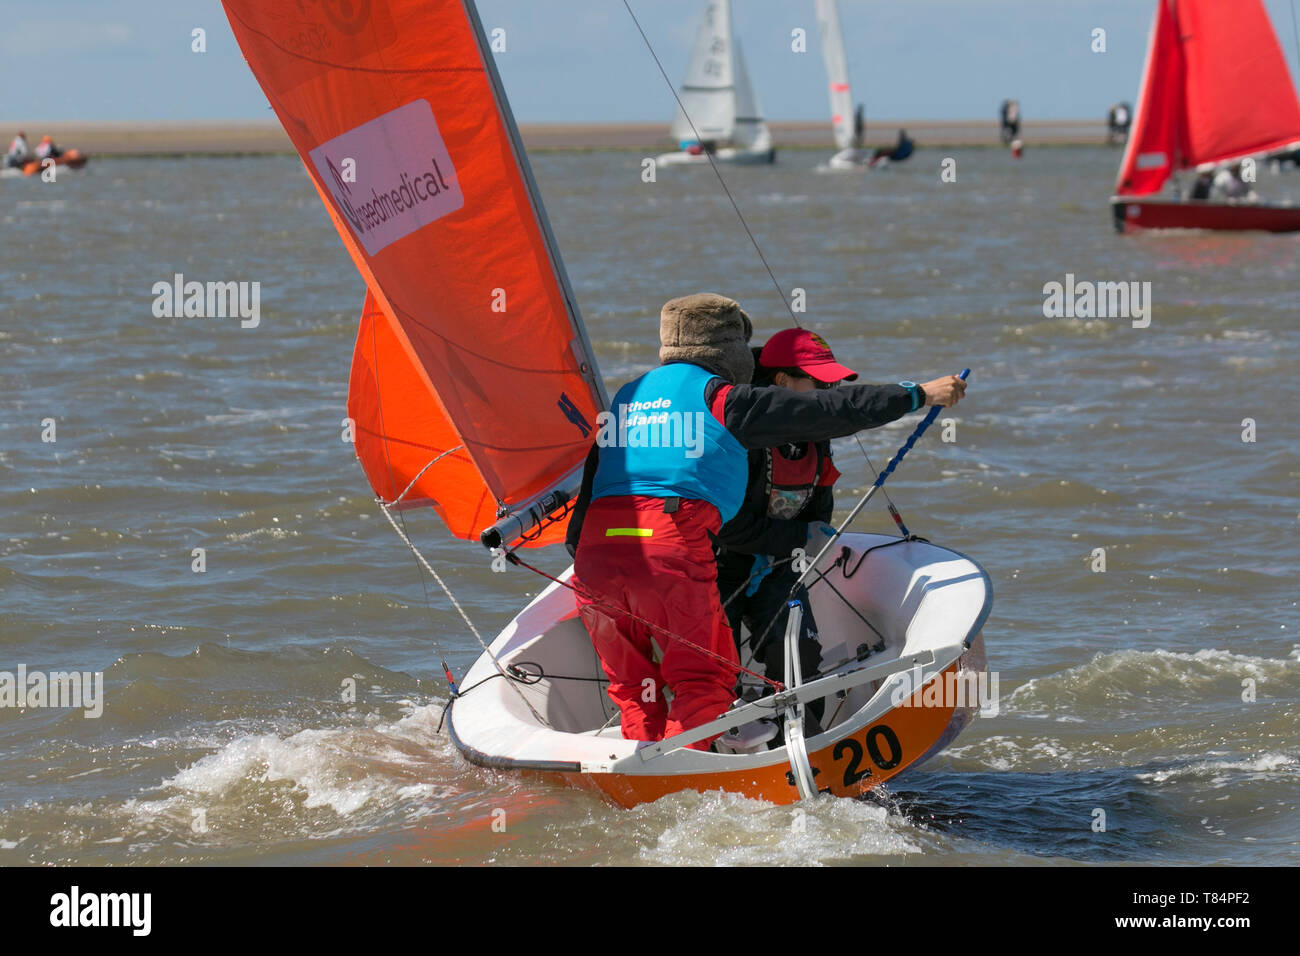 Yacht Racing in West Kirby, Liverpool, UK. 11th May, 2019. British Open Team Racing Championships Trophy Sailing's Premier League ‘The Wilson Trophy' 200. The maximum number of race teams has been increased to 36. The 2019 event features 5 American teams, 2 Irish crews, 1 Australian boat and making their debut appearance Team Austria. Rounding out the field will be 27 British teams, including defending champions, the West Kirby Hawks. Recent winners also returning are West Exempt, Royal Forth Hoosiers, and Birdham Bandits. Stock Photo